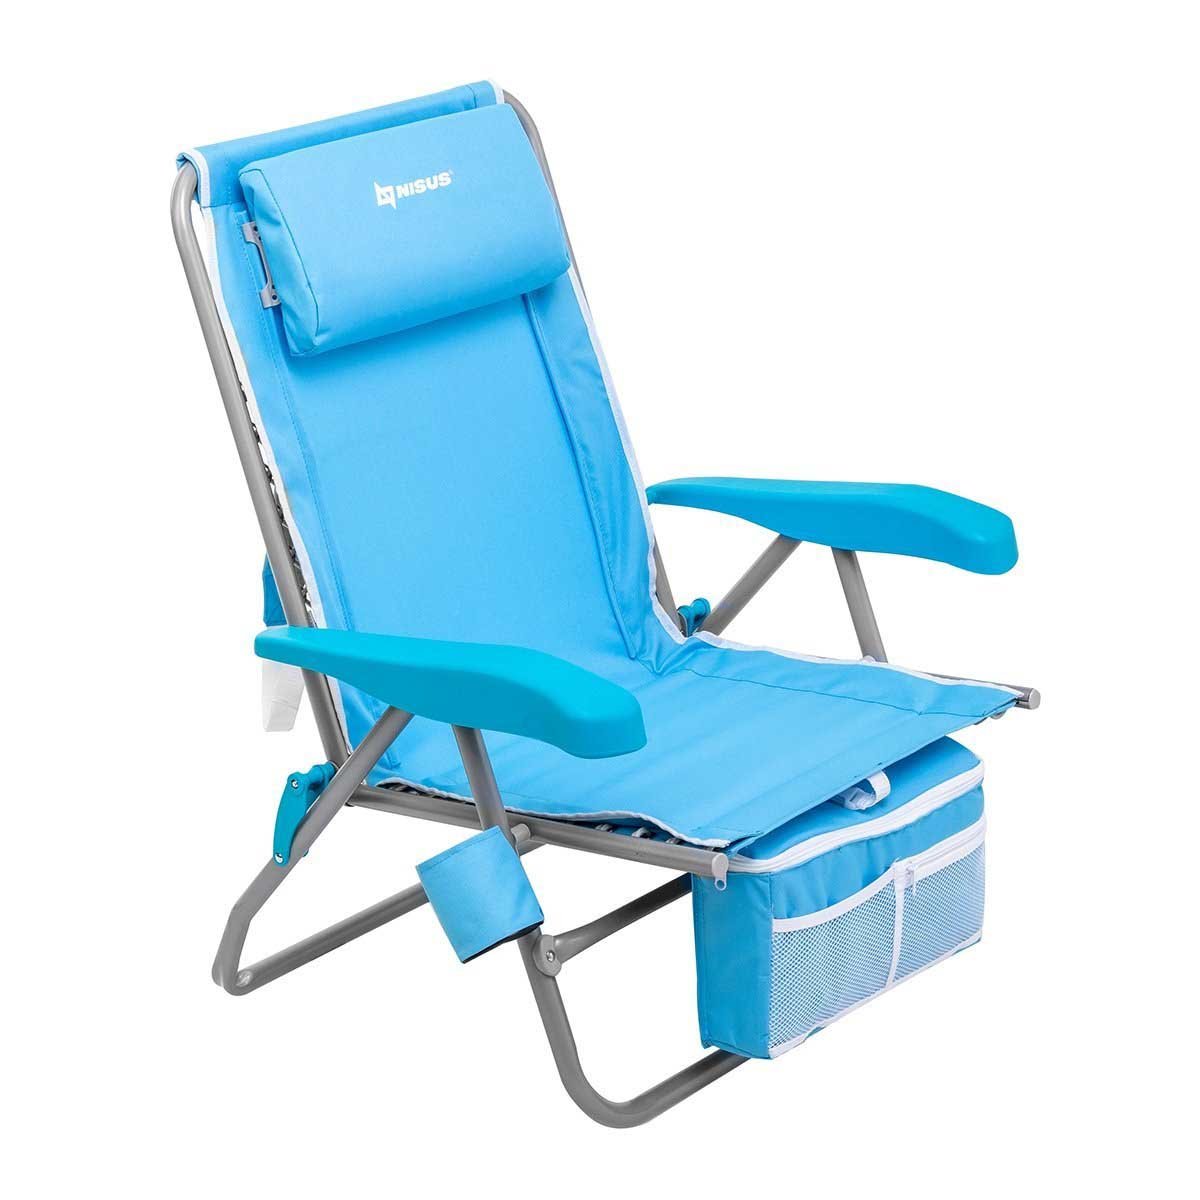 Premium Backpack Beach Chair with Cooler Bag and Headrest, Blue